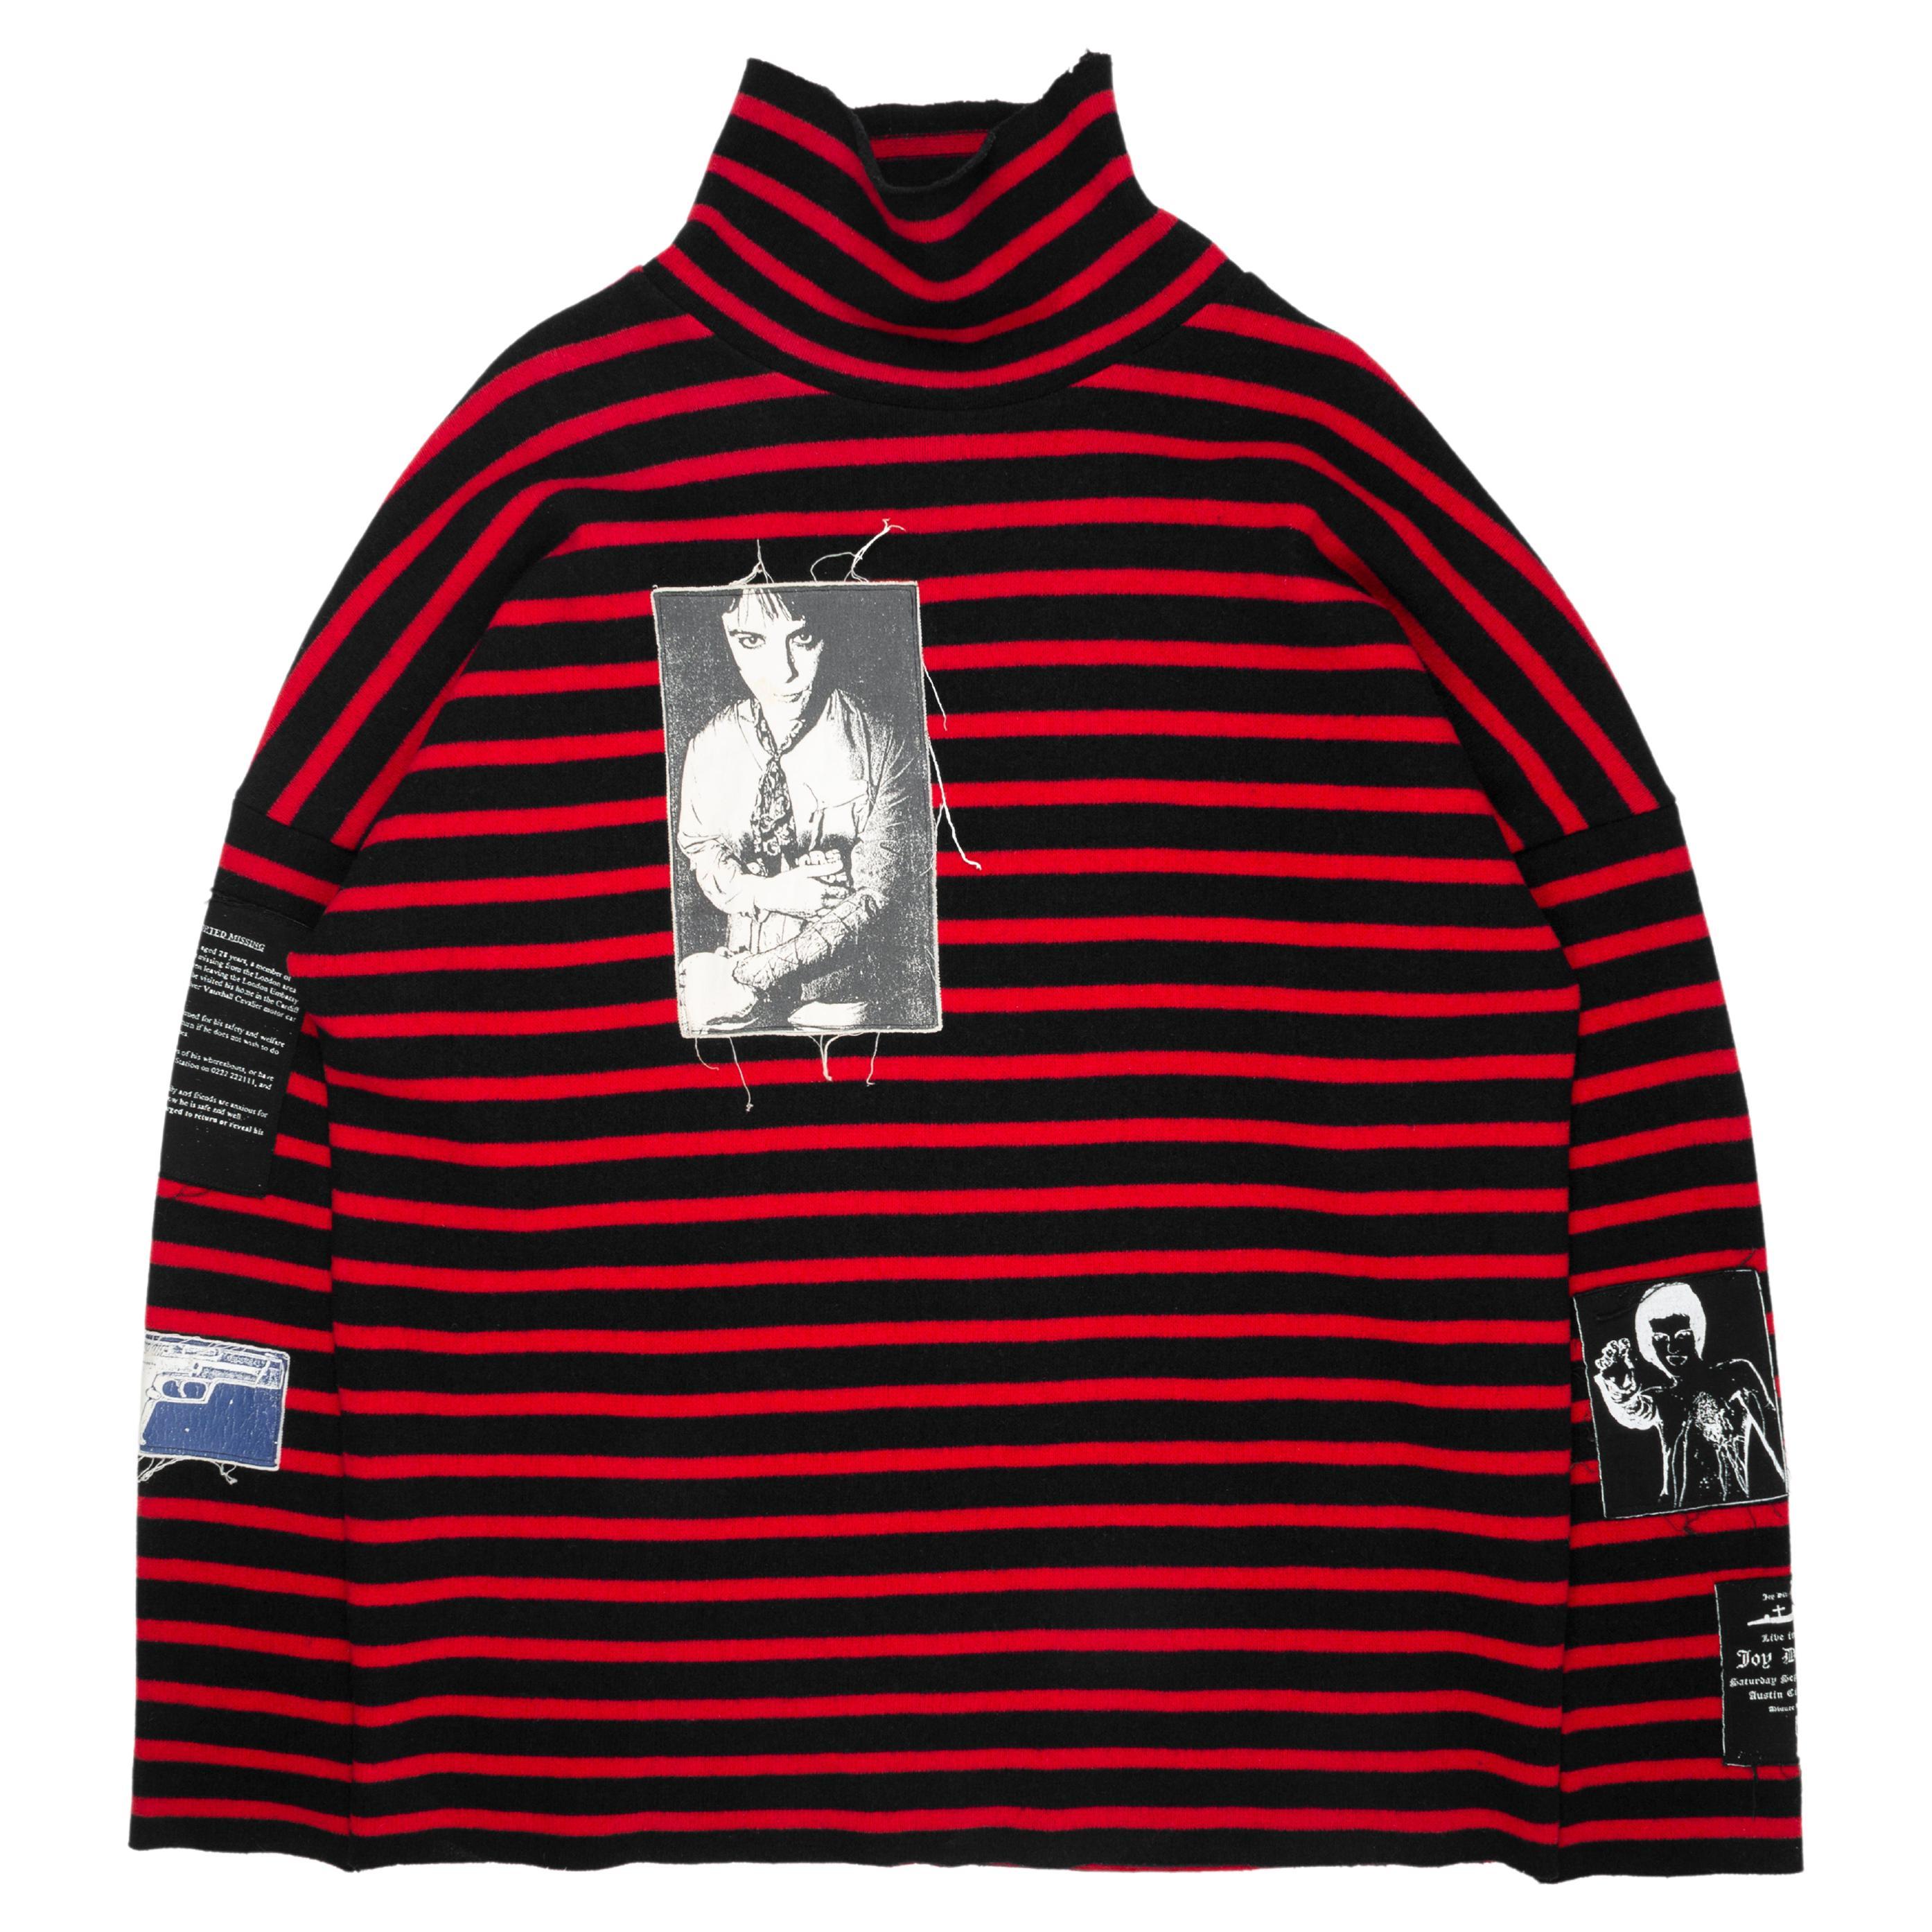 Raf Simons AW2001 "Riot! Riot! Riot!" Patched Turtleneck Sweater